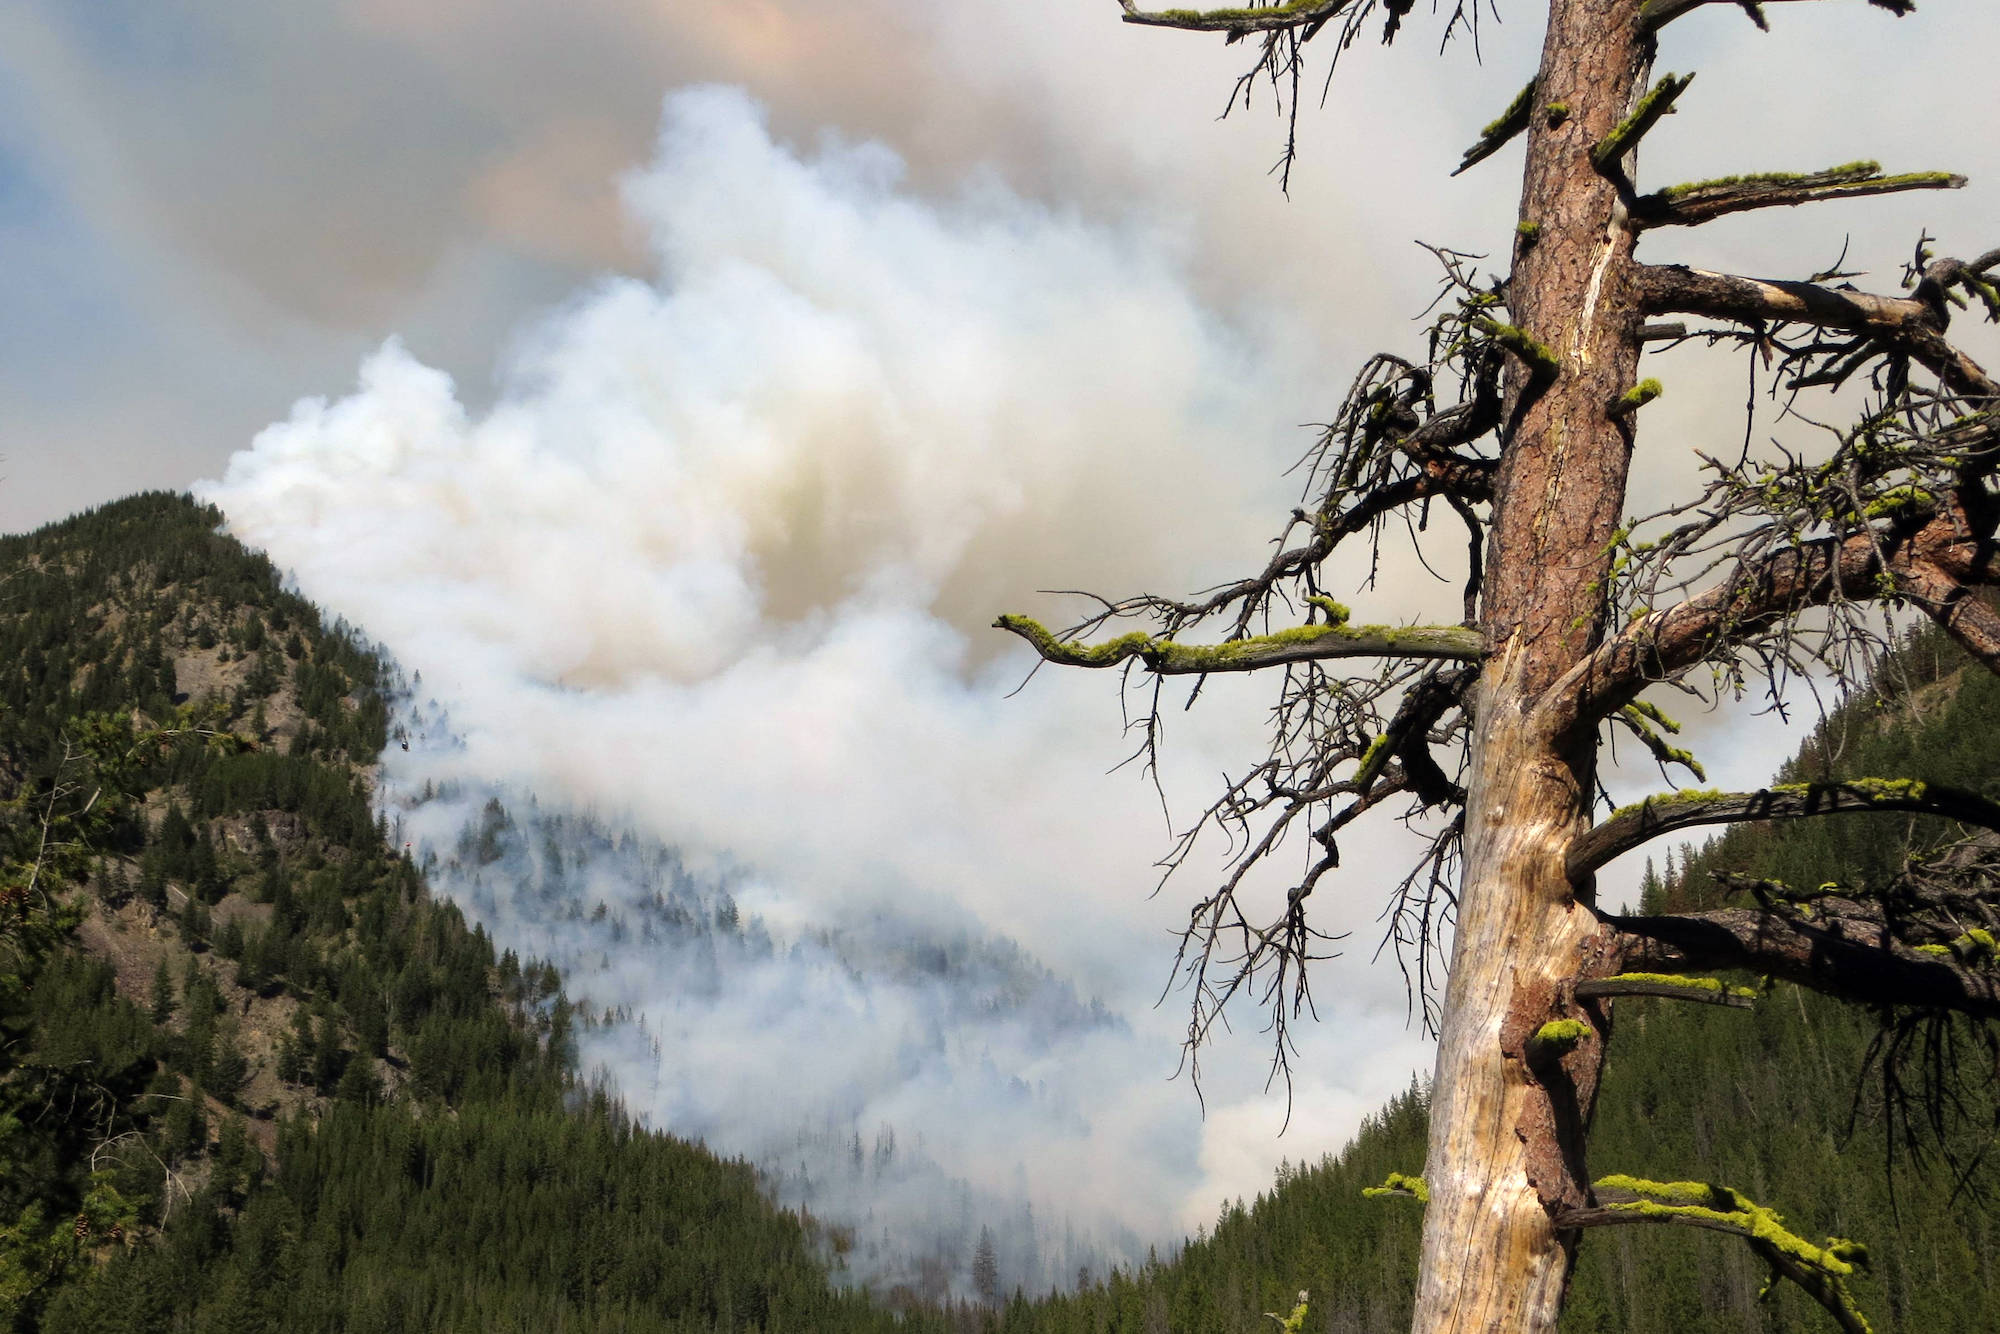 Cross-border wildfire continues to burn